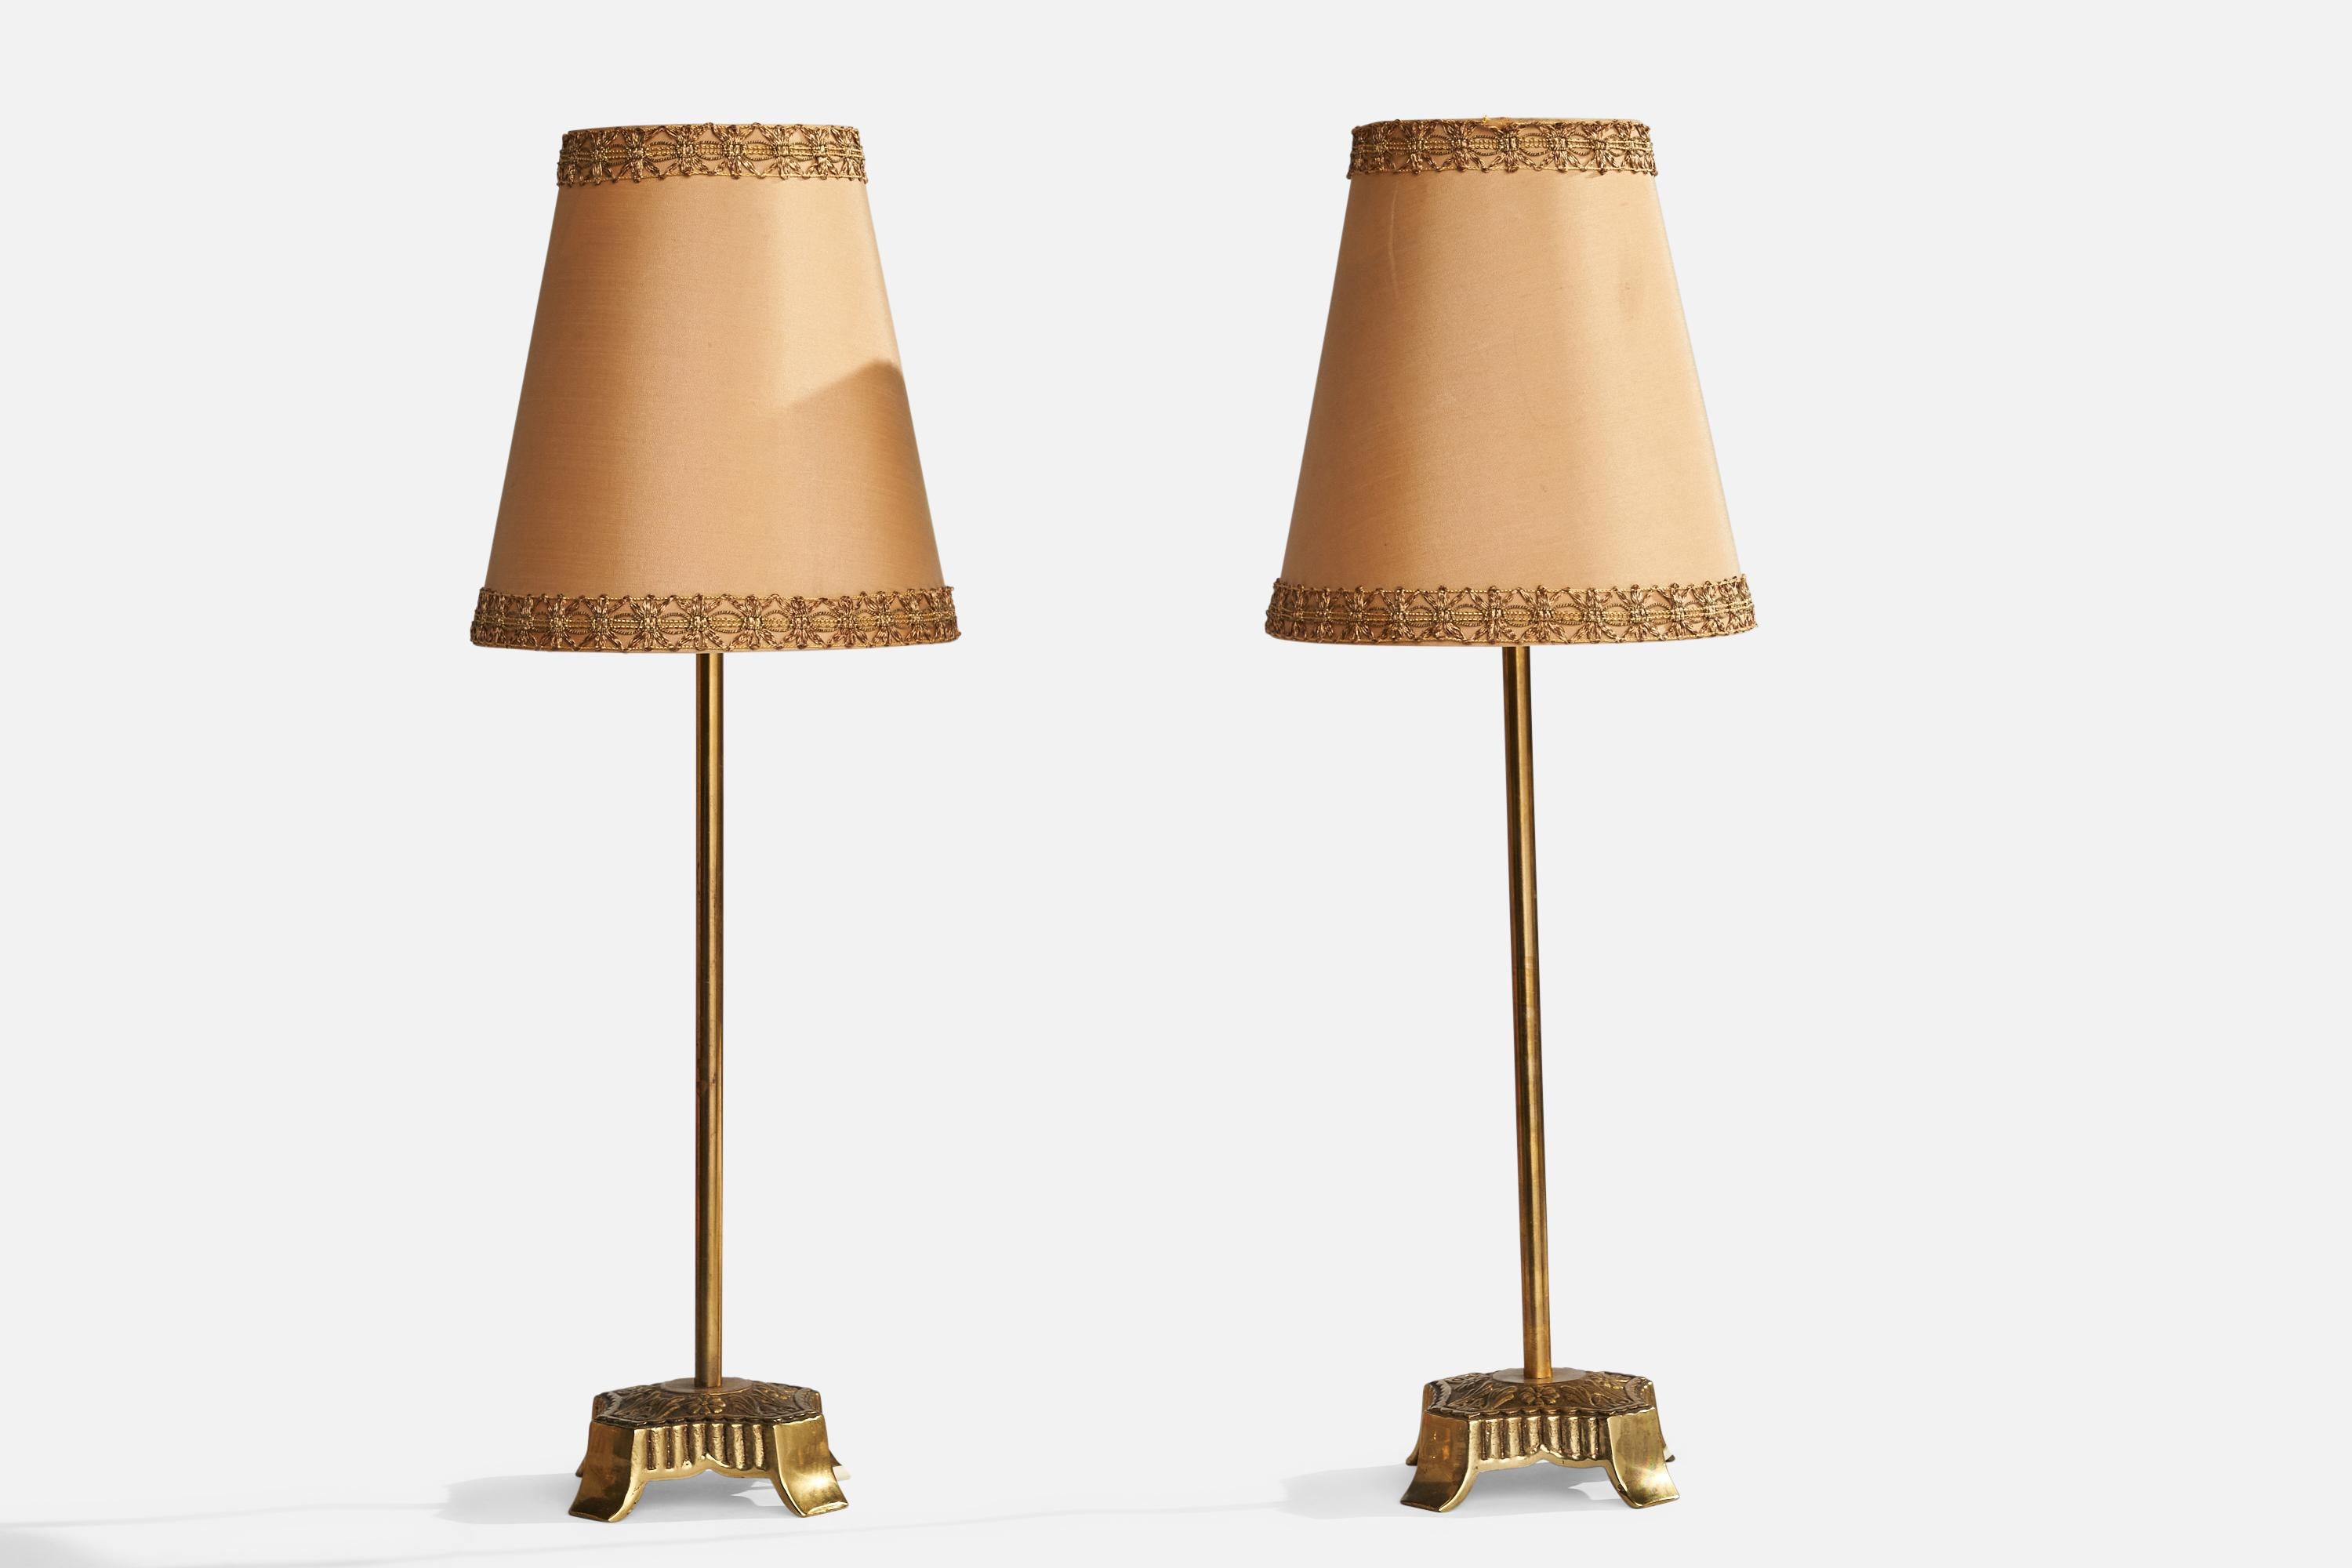 A pair of brass and beige fabric table lamps designed and produced in Sweden, c. 1940s.

Overall Dimensions (inches): 19.75”  H x 6.5”  W x 4”  D
Stated dimensions include shade.
Bulb Specifications: E-26 Bulb
Number of Sockets: 2
All lighting will